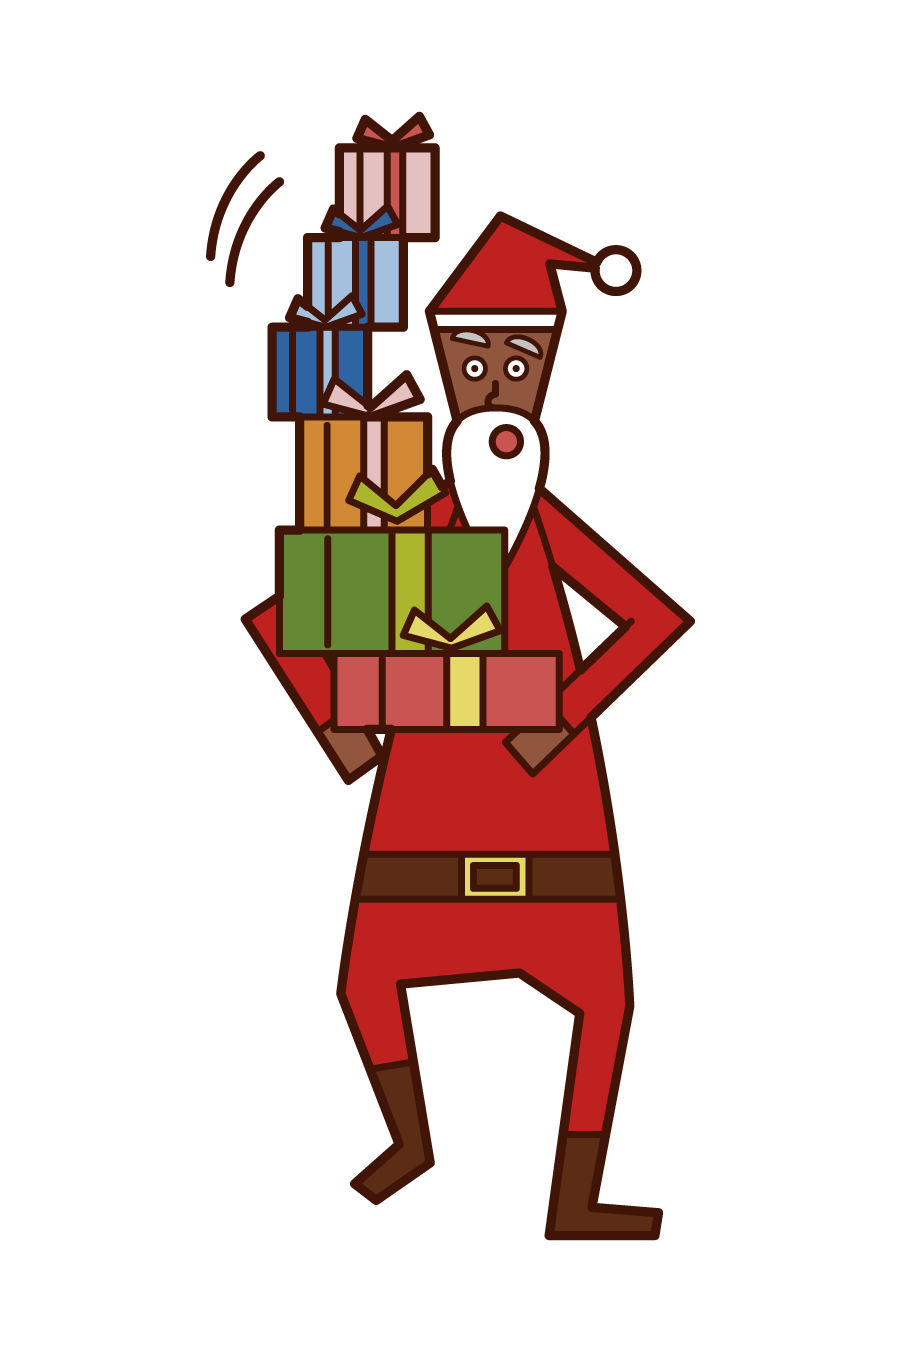 Illustration of Santa Claus with a lot of presents